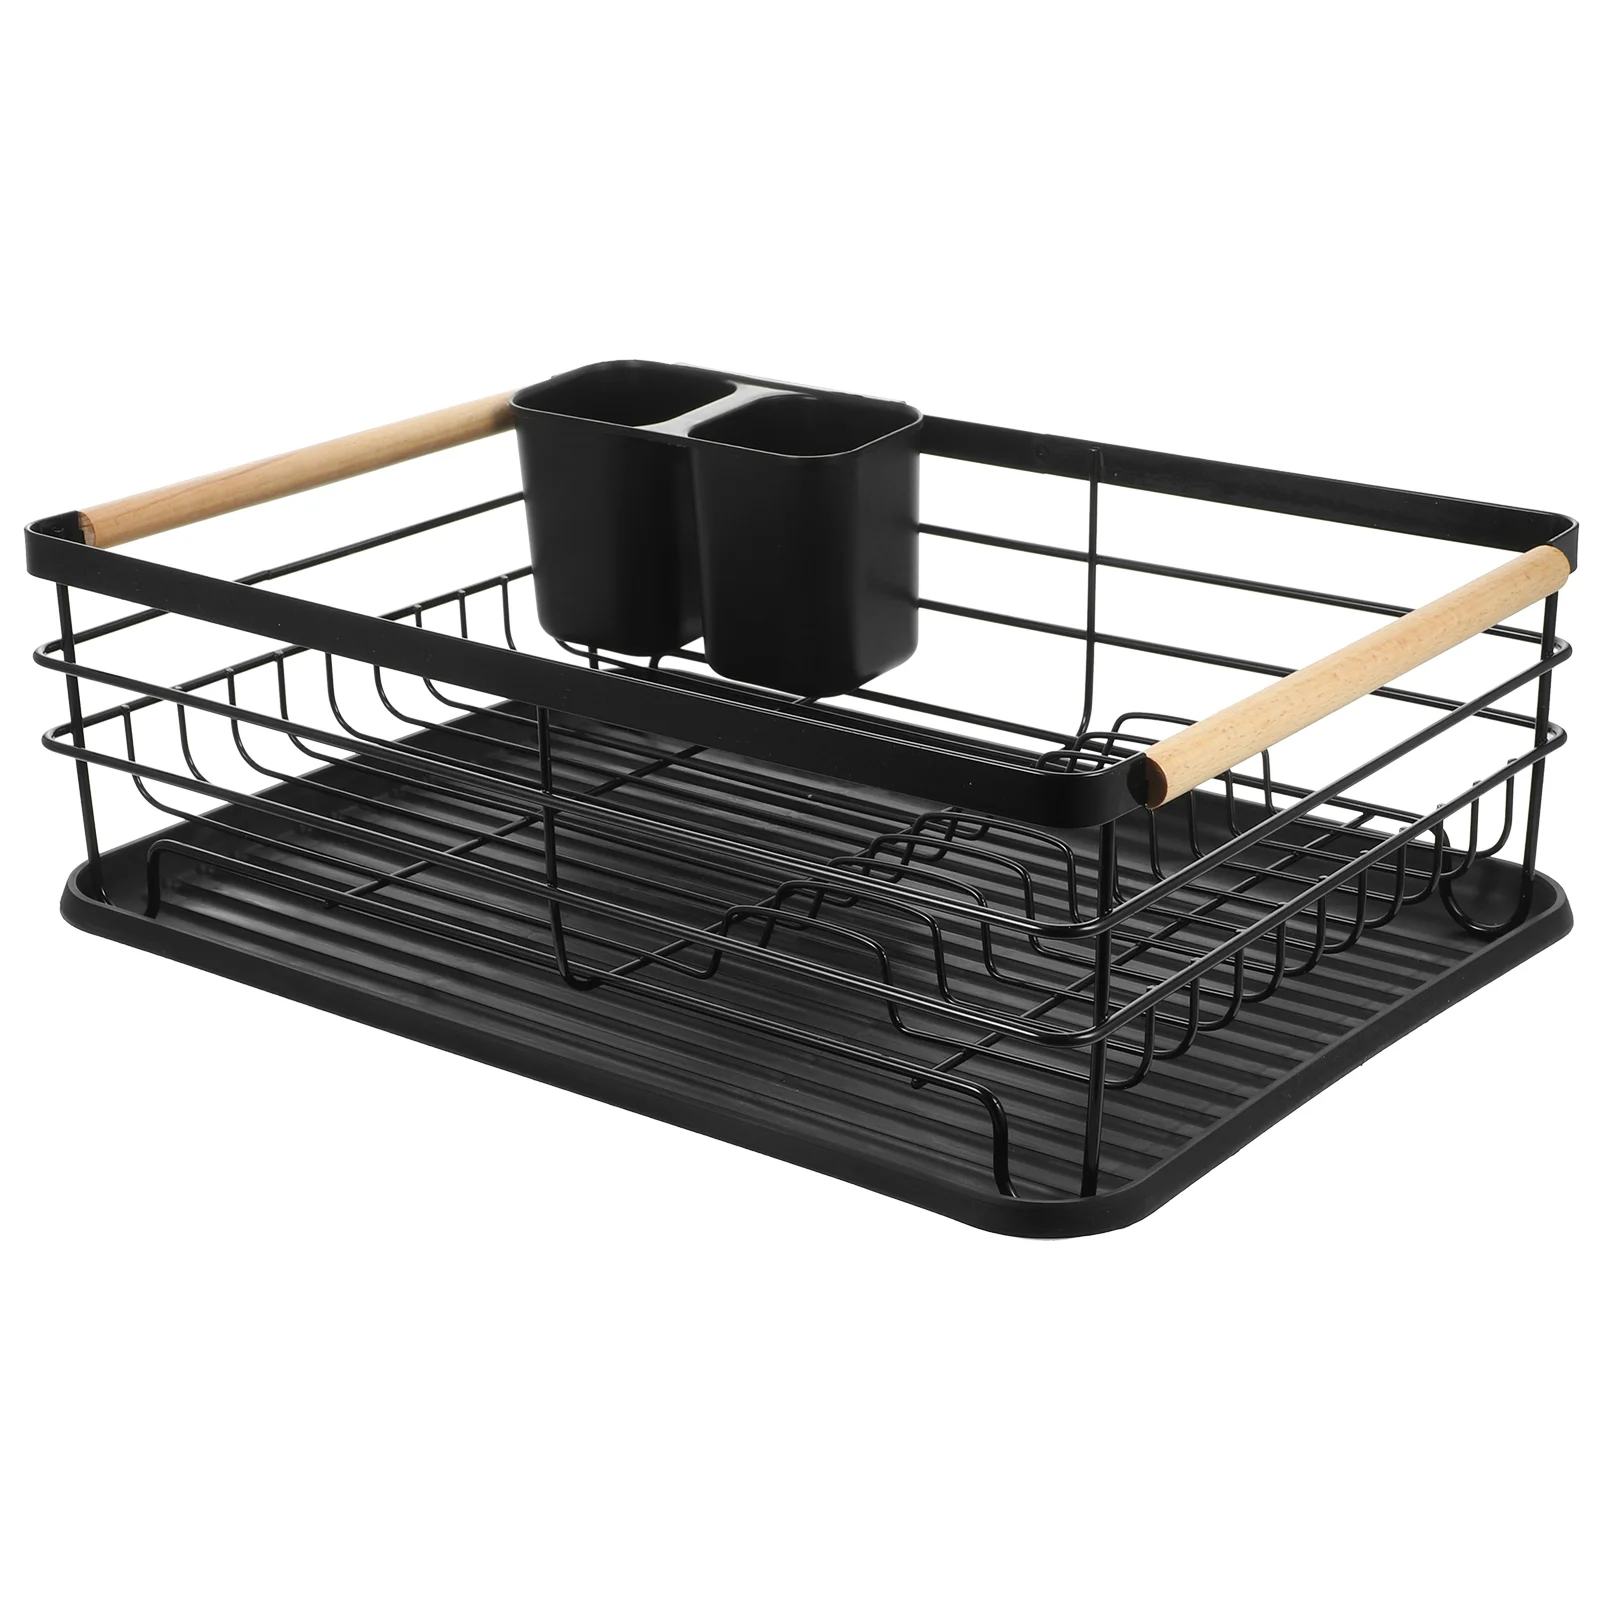 

Drying Rack Kitchen Dish Drain Metal Sink Counter The Racks Iron Strainers Large Cutlery Holder